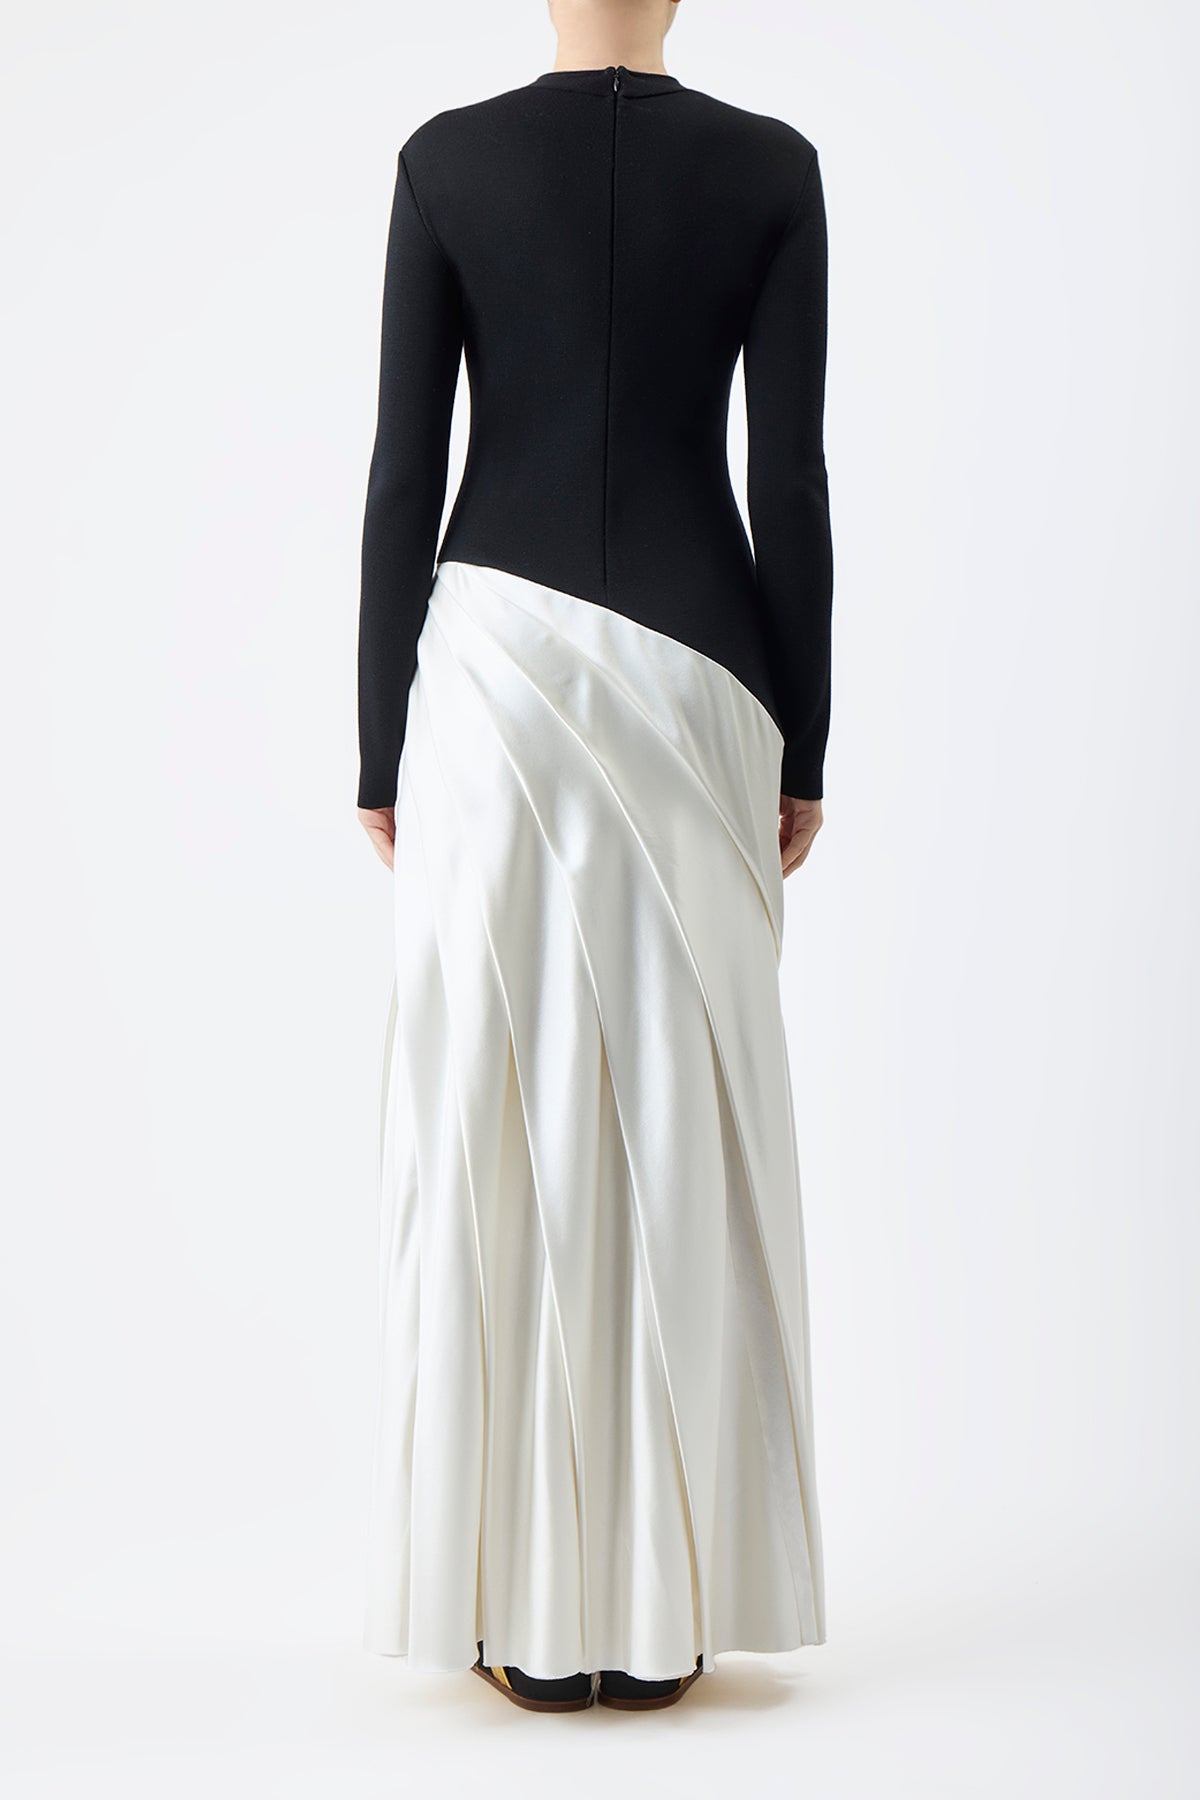 Ismay Pleated Dress in Black & Ivory Double Satin